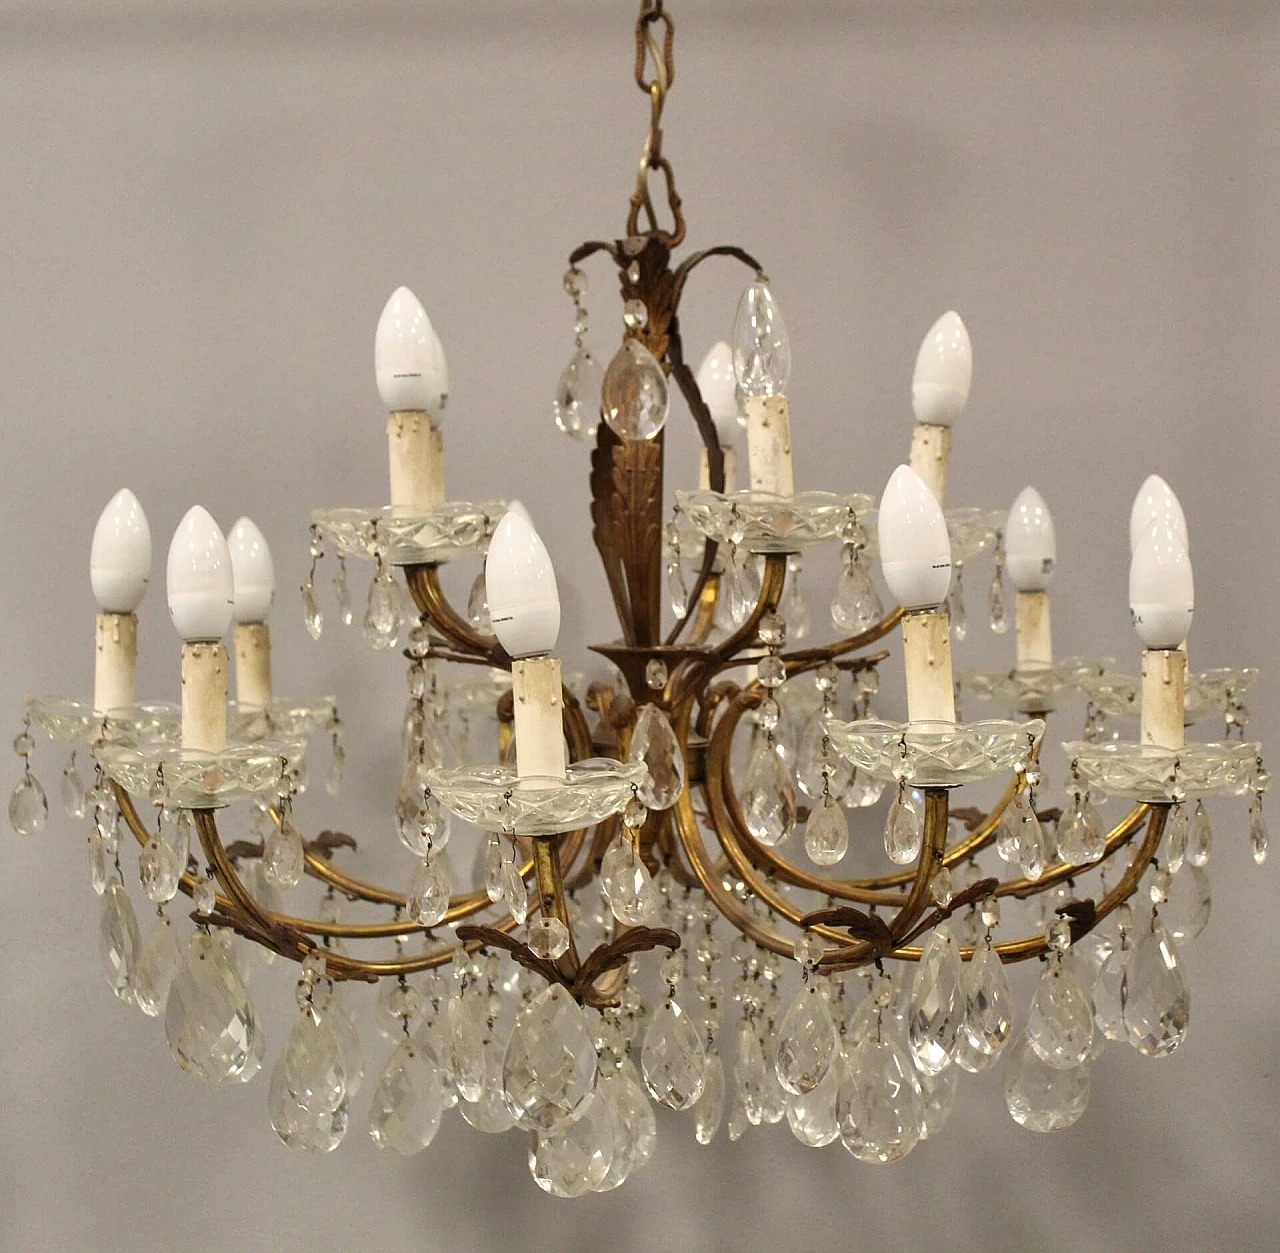 15-light chandelier with crystal drops, mid-19th century 2